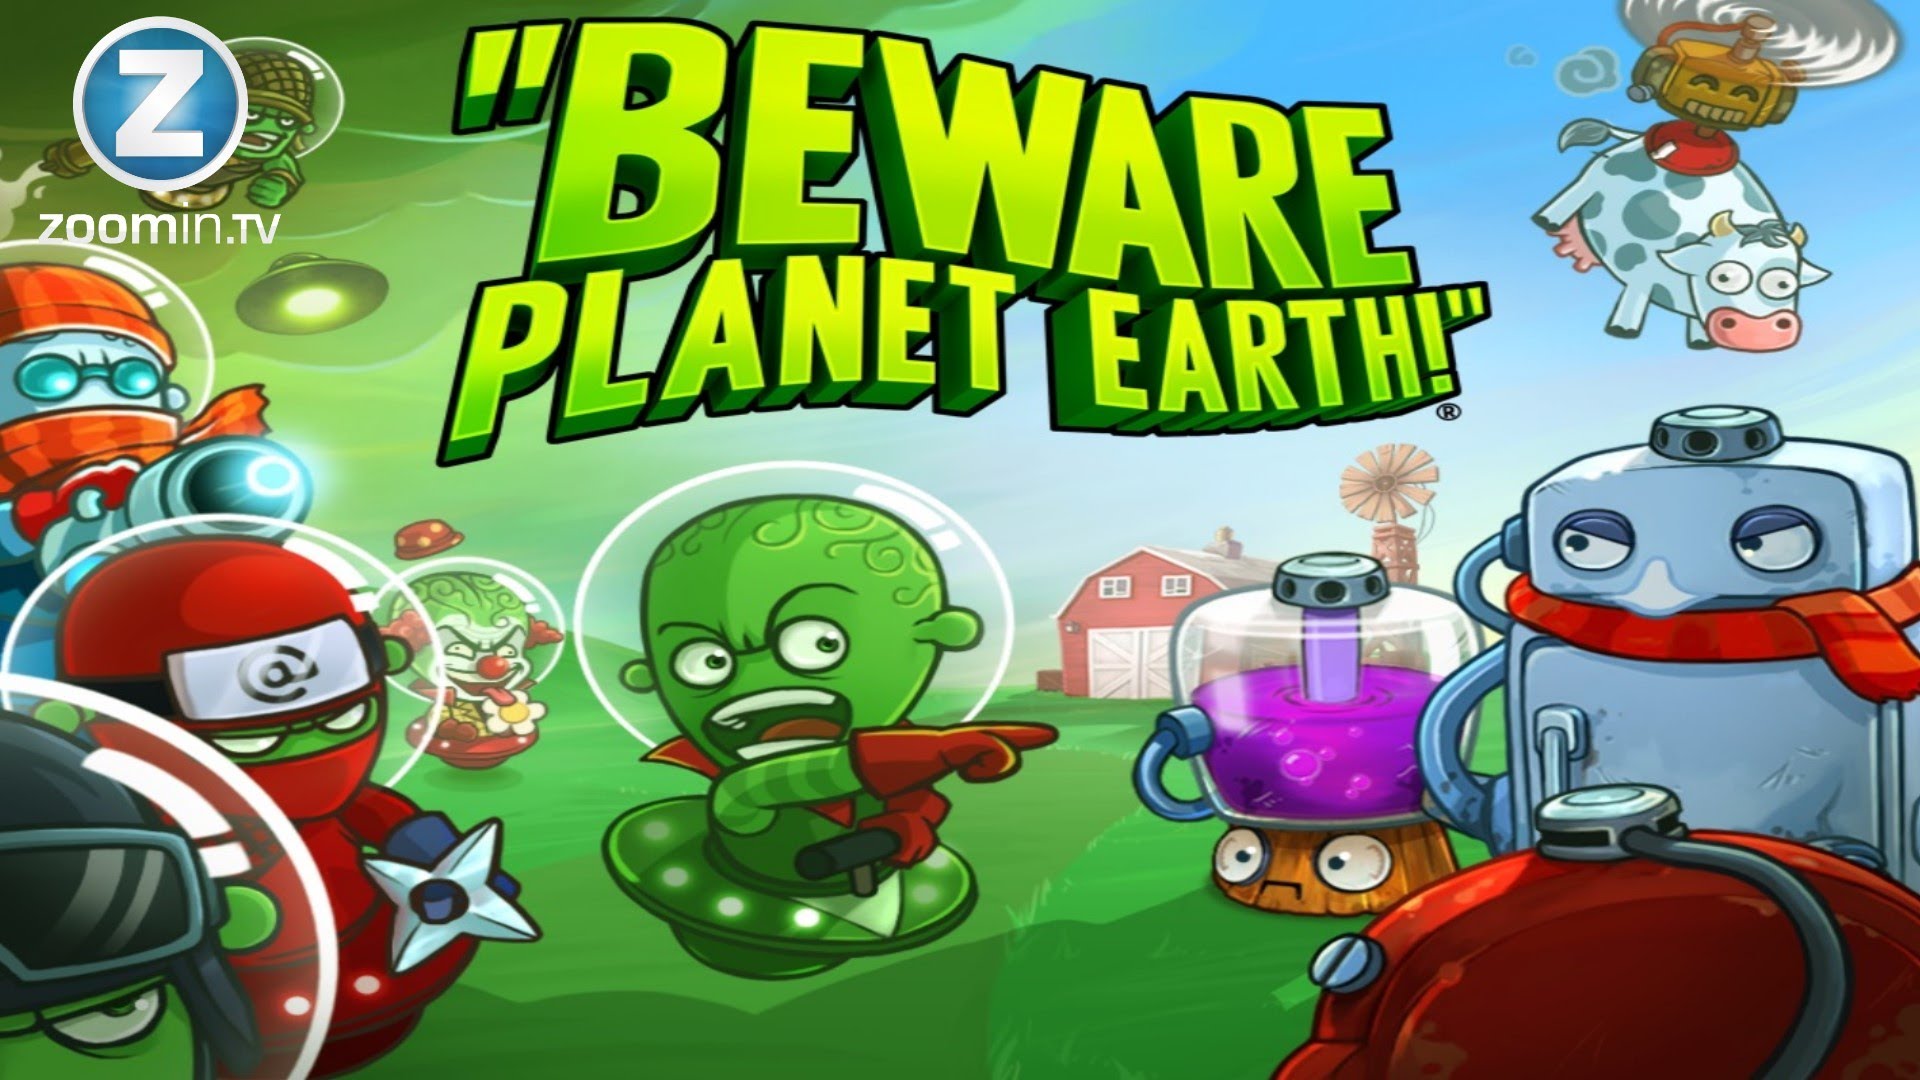 Nice wallpapers Beware Planet Earth 1920x1080px